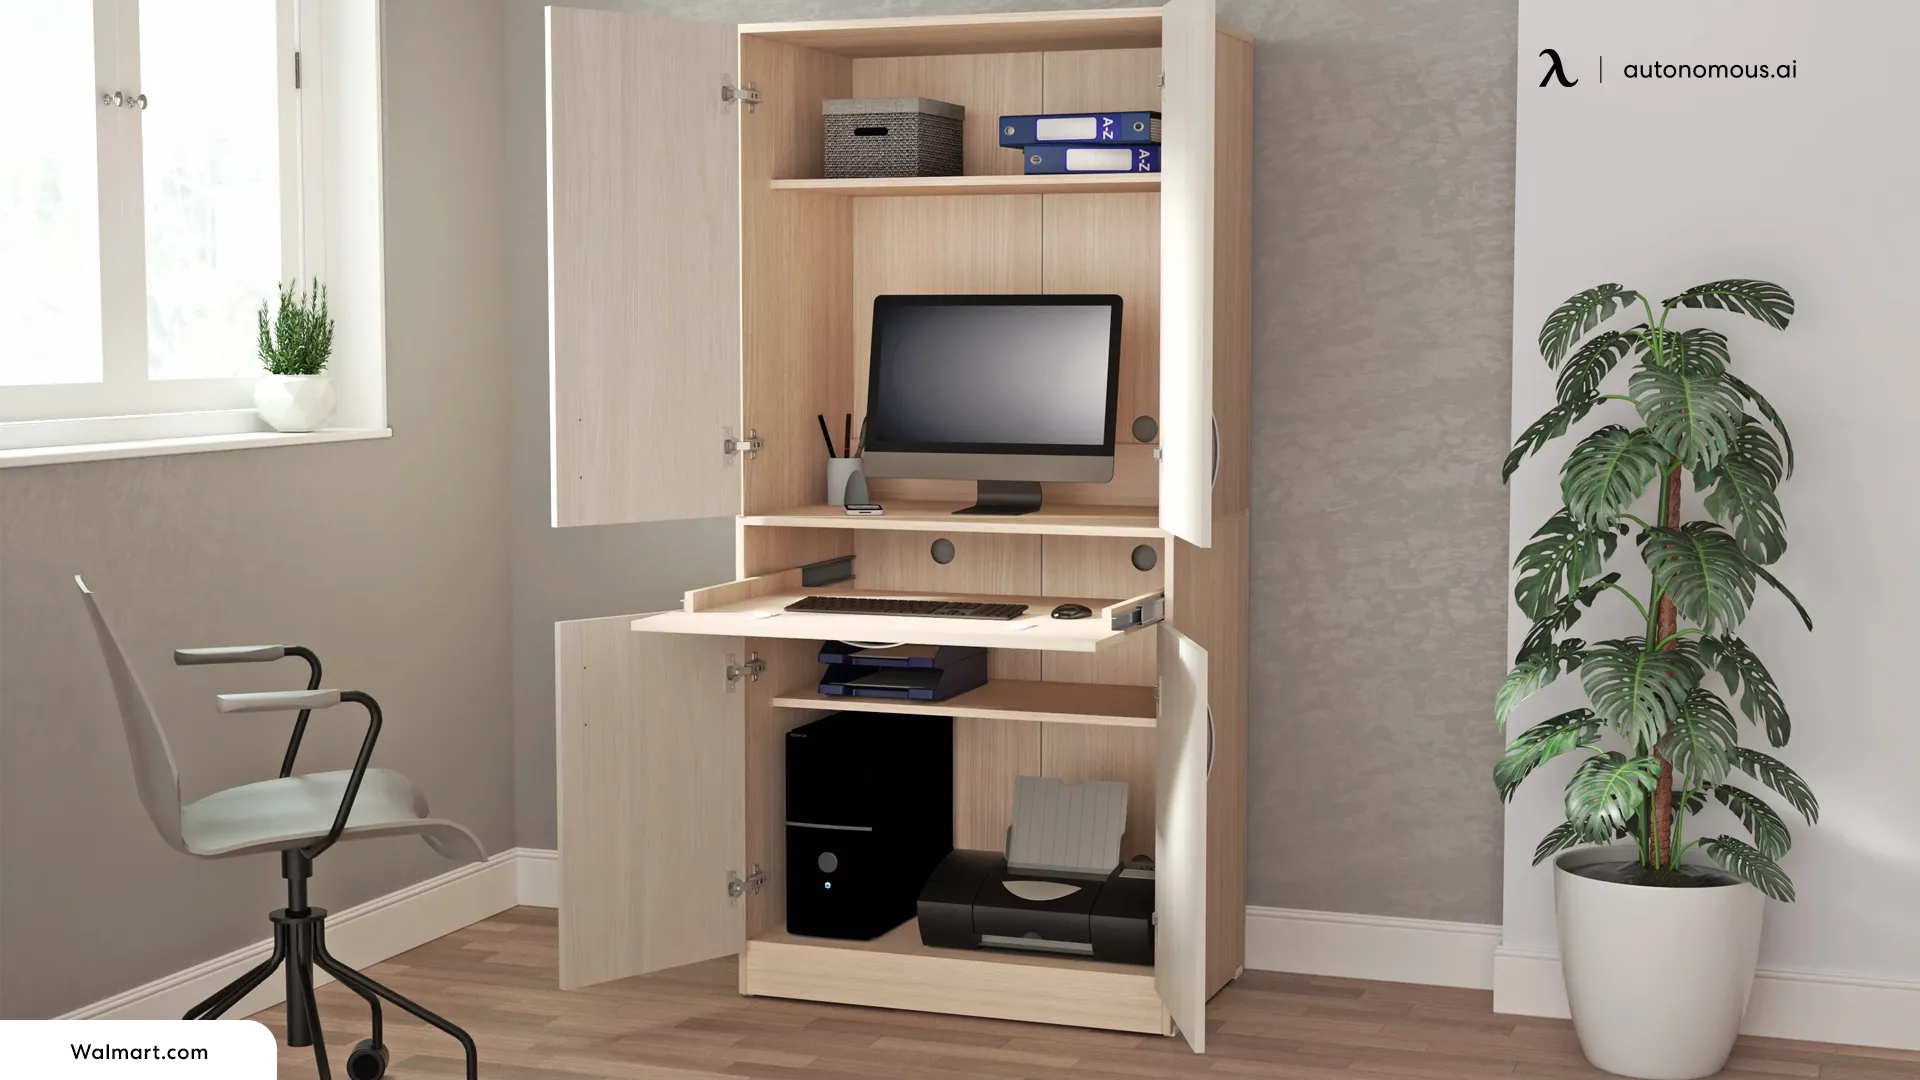 Incorporate a Stylish Cabinet or Armoire - hide computer tower